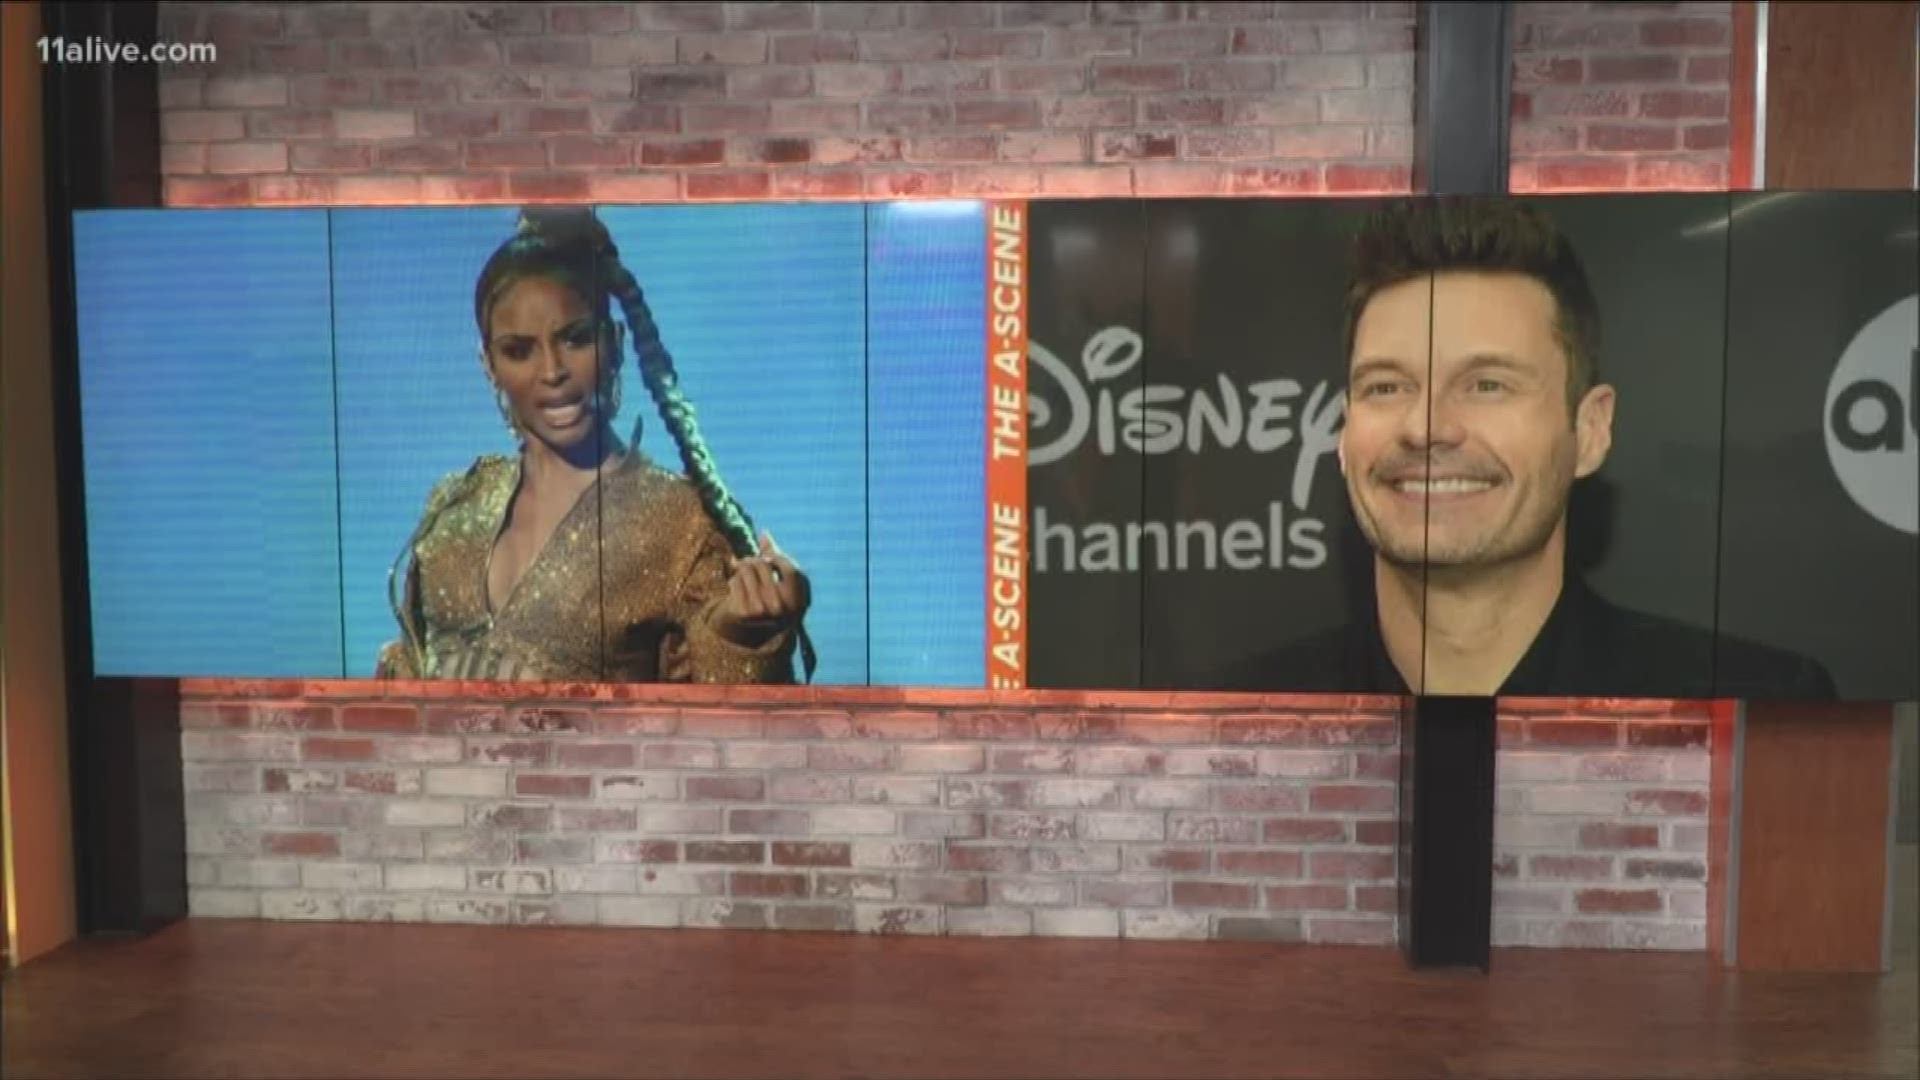 Seacrest hosts Dick Clark's New Year's Rockin' Eve while Ciara will be presenting for the broadcast from Los Angeles.